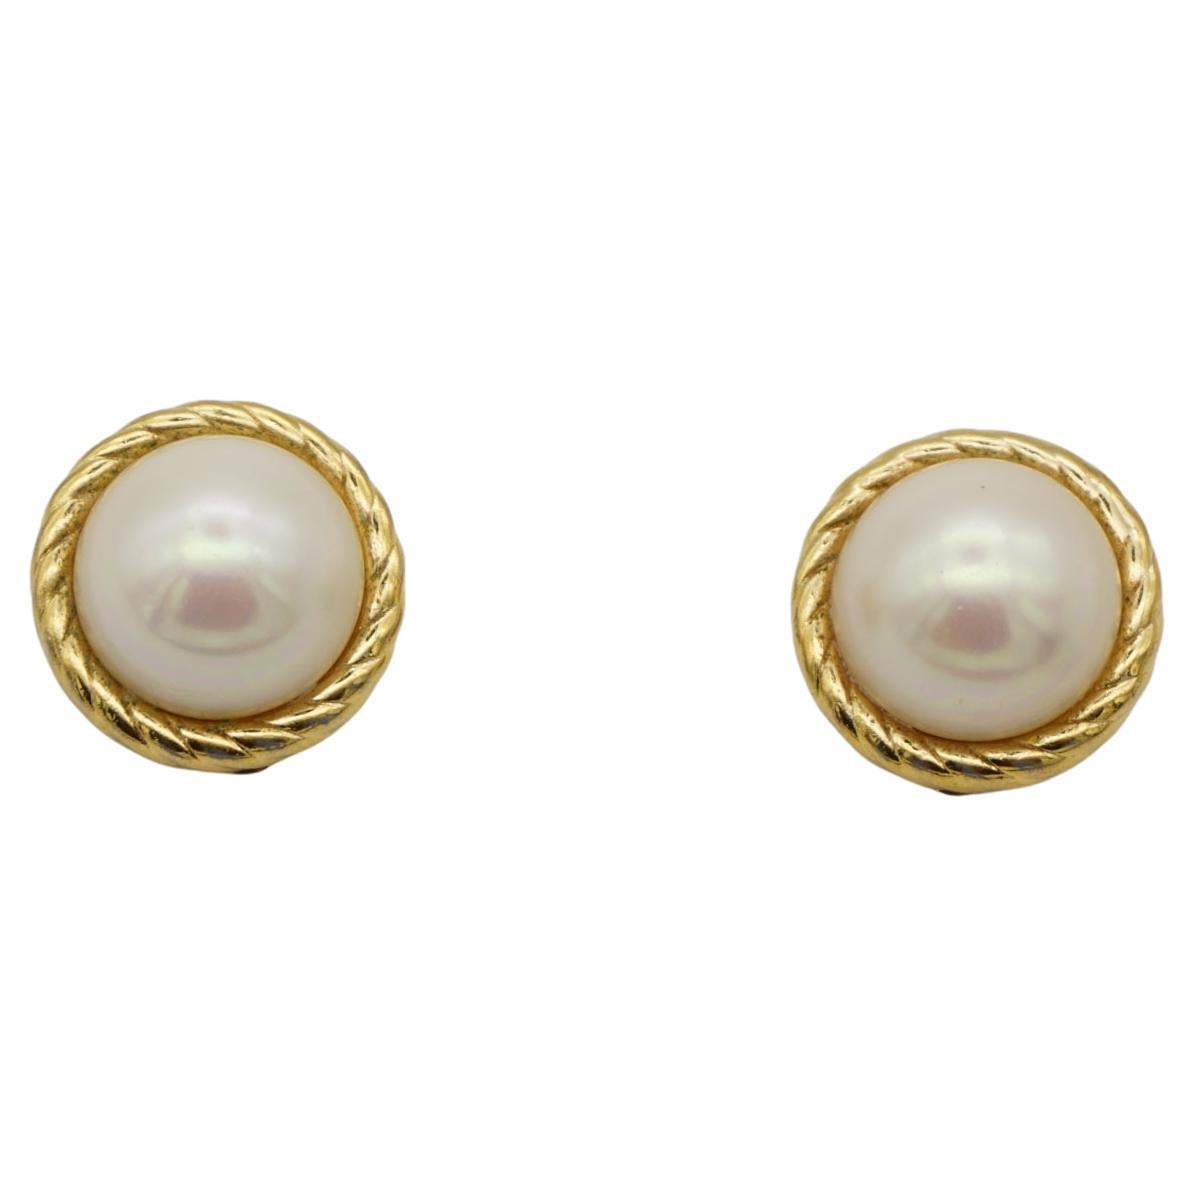 Christian Dior Vintage 1980s Large Round White Pearl Twist Gold Clip Earrings For Sale